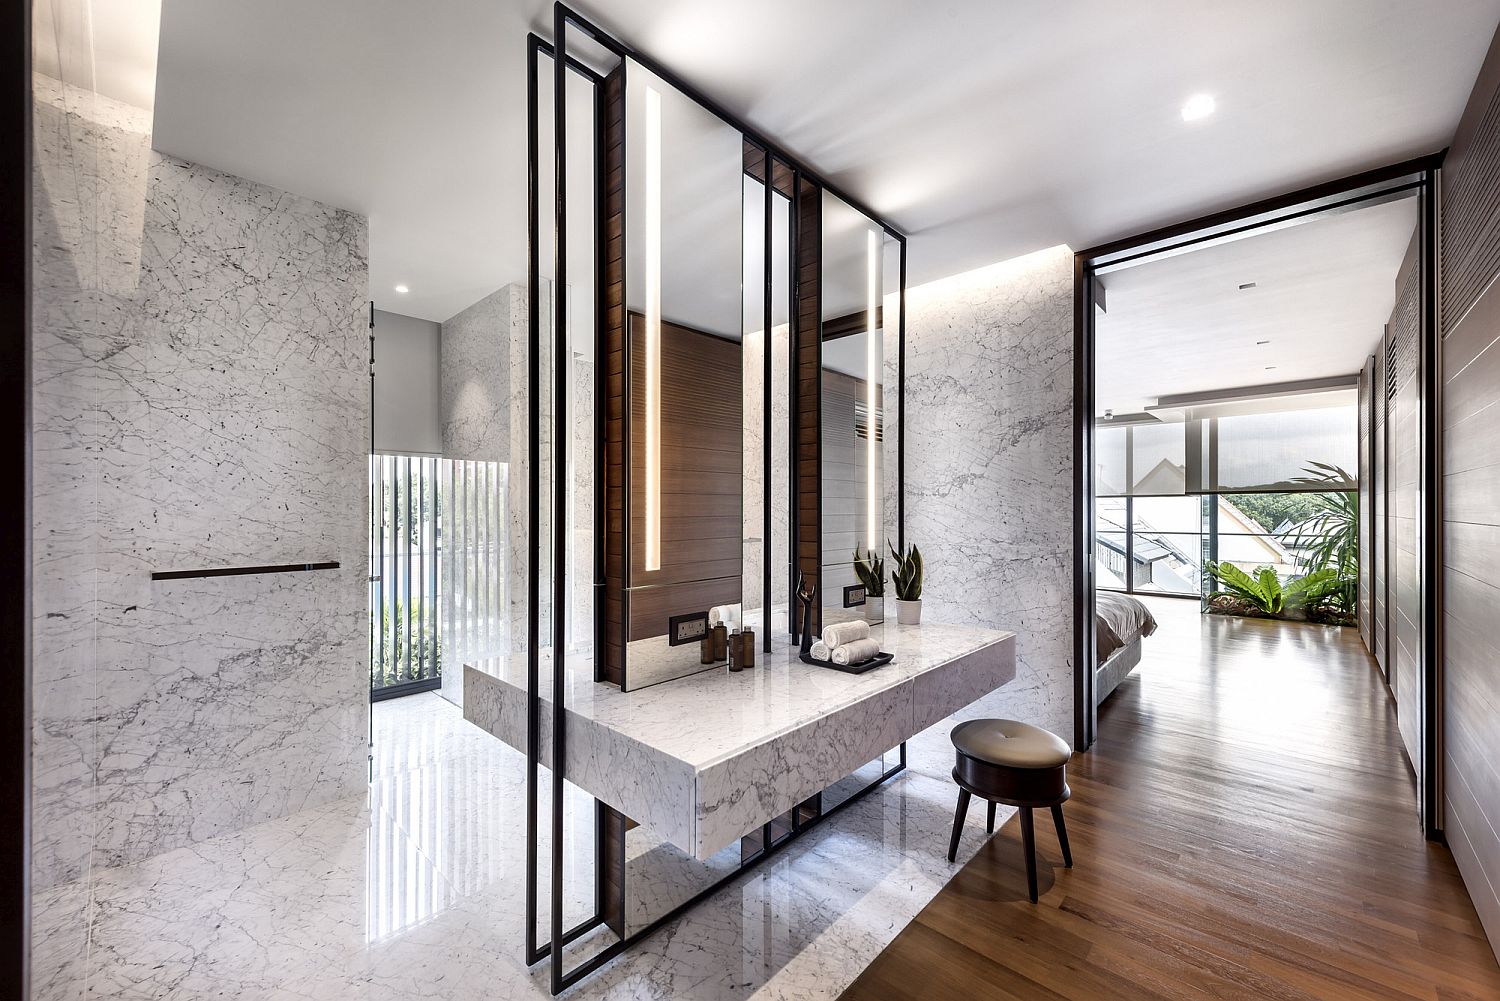 Spacious and stylish contemporary bath with a fabulous vanity